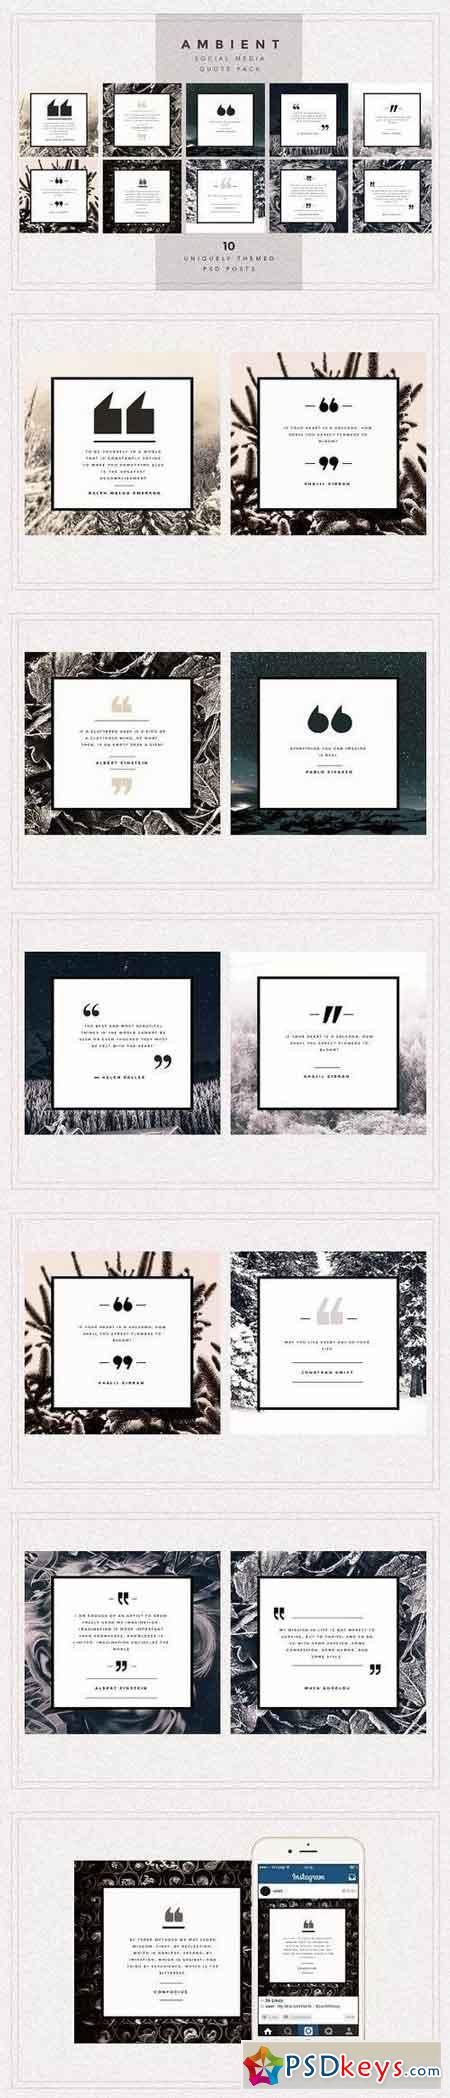 AMBIENT Social Media quote pack 1308486